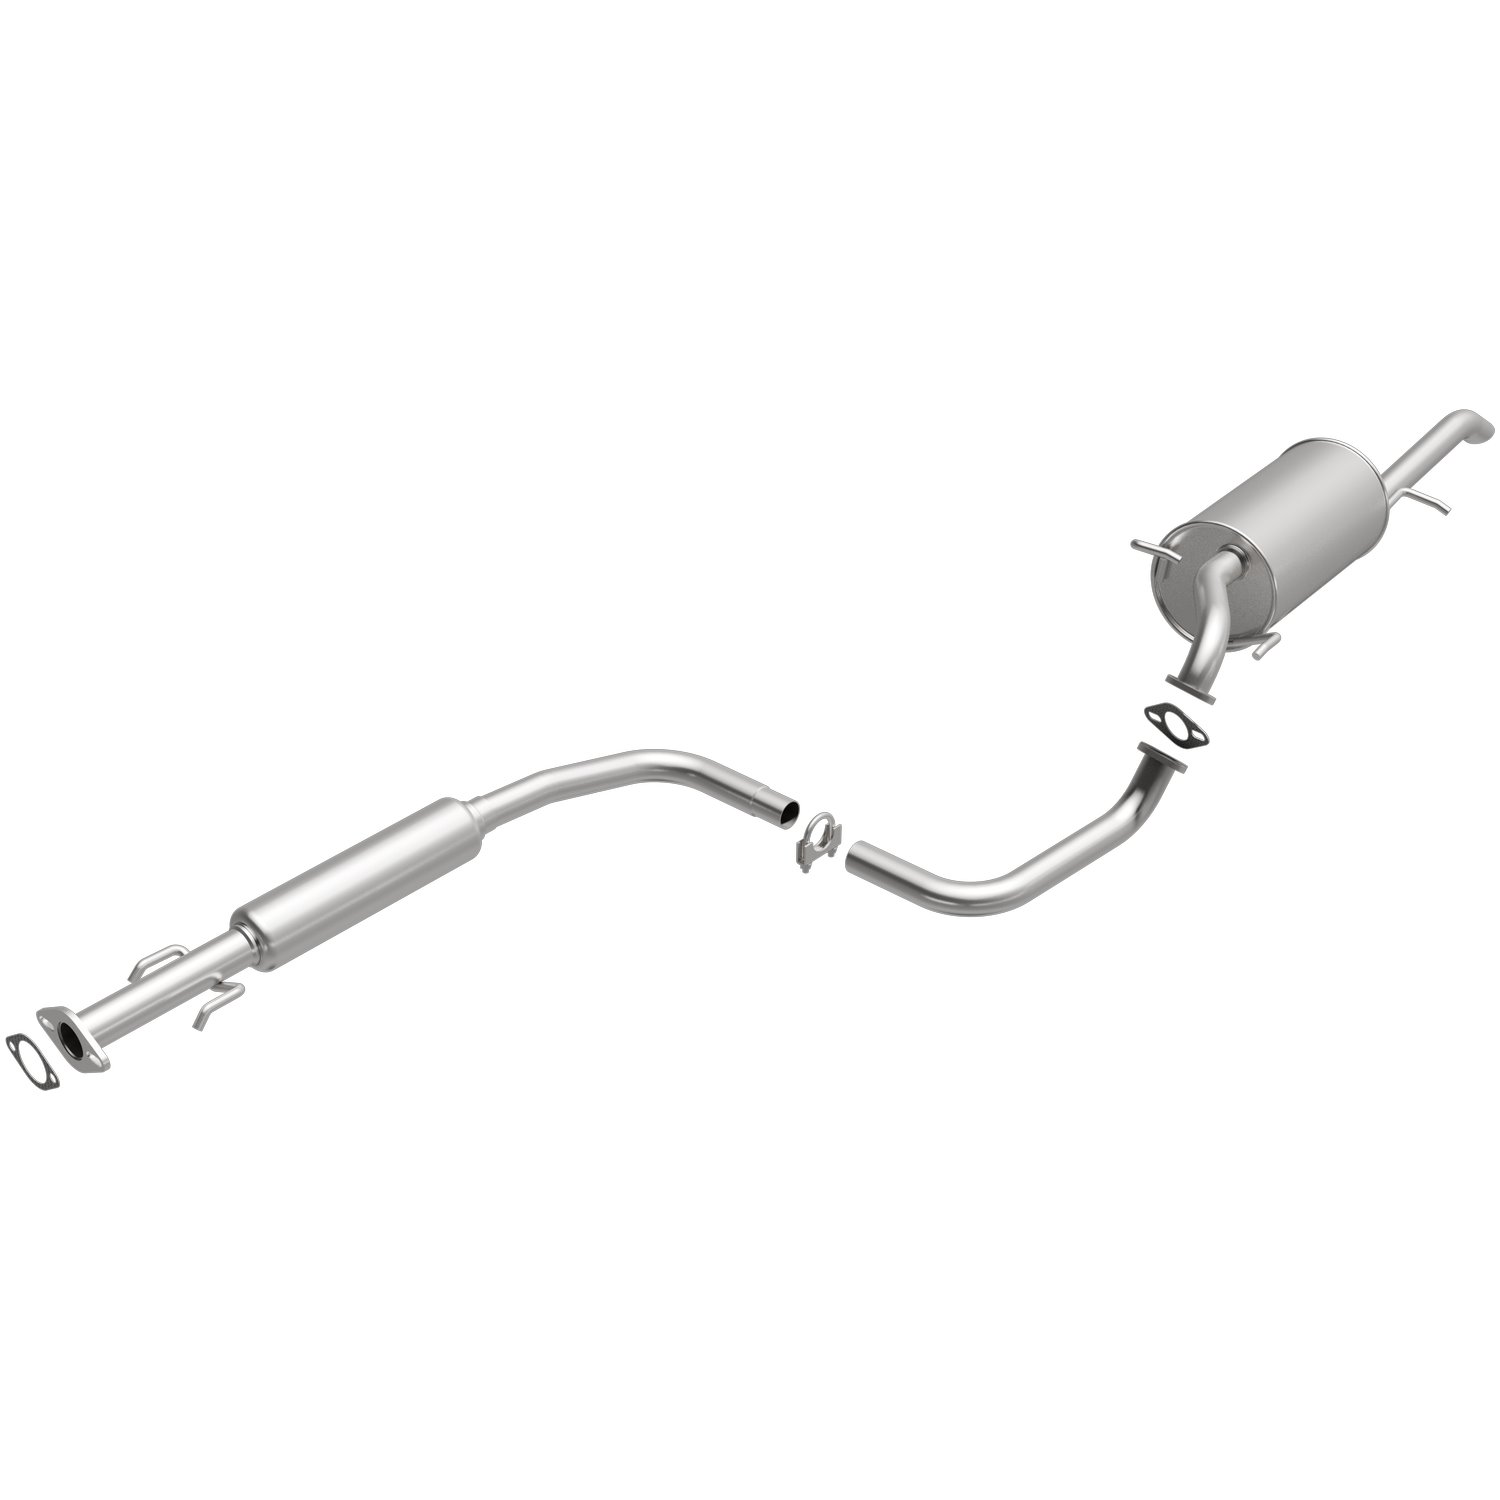 Direct-Fit Exhaust Kit, 2009-2011 Chevy Aveo 1.6L